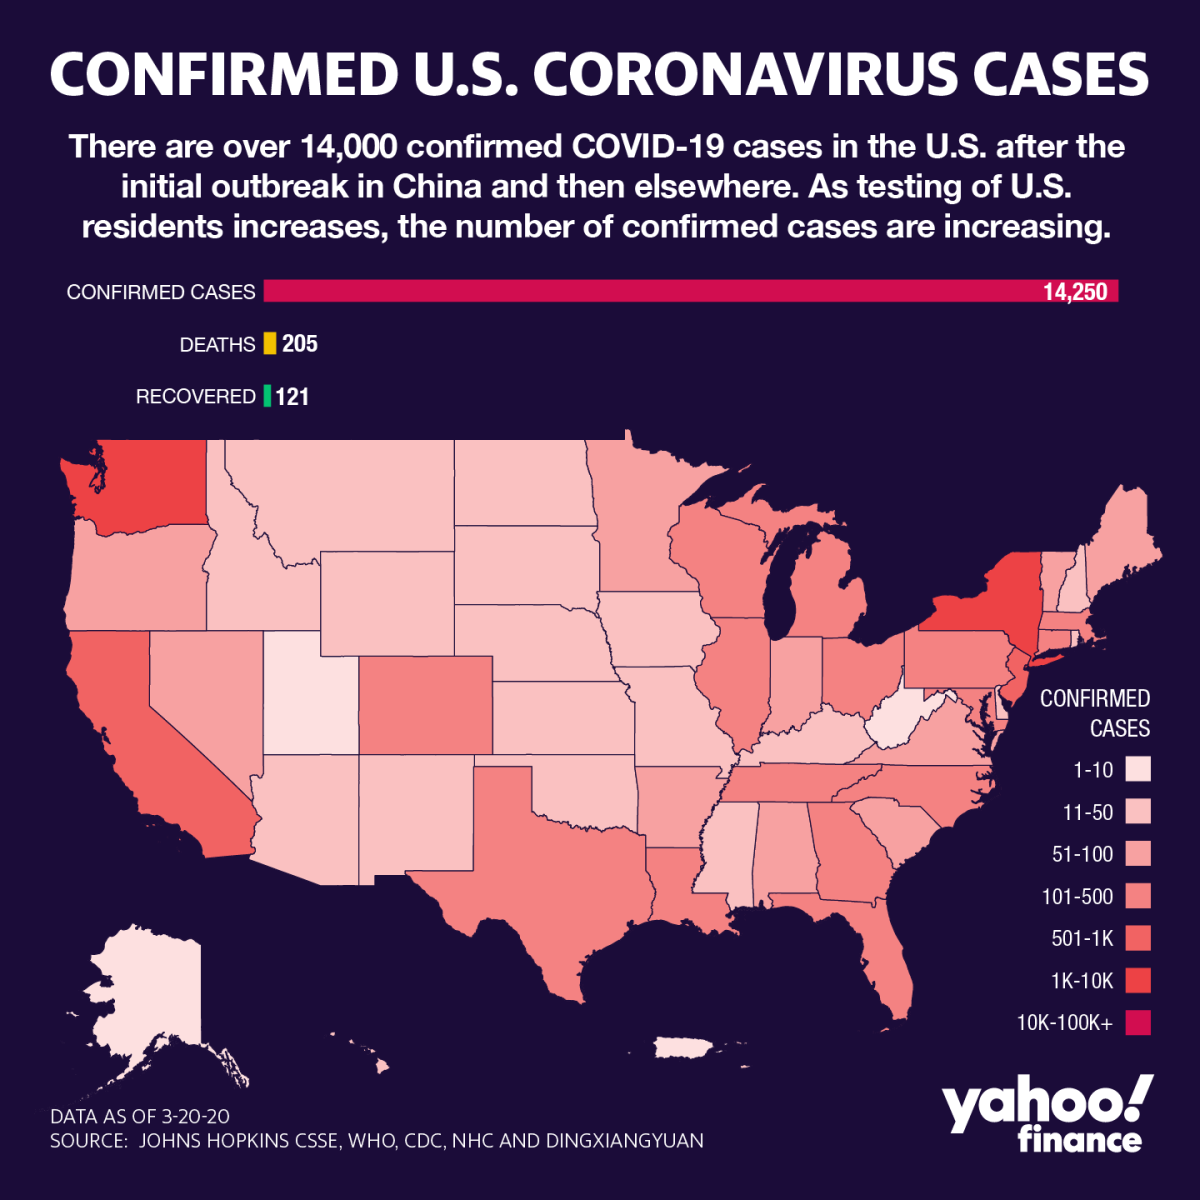 Why New York is the epicenter of the American coronavirus outbreak